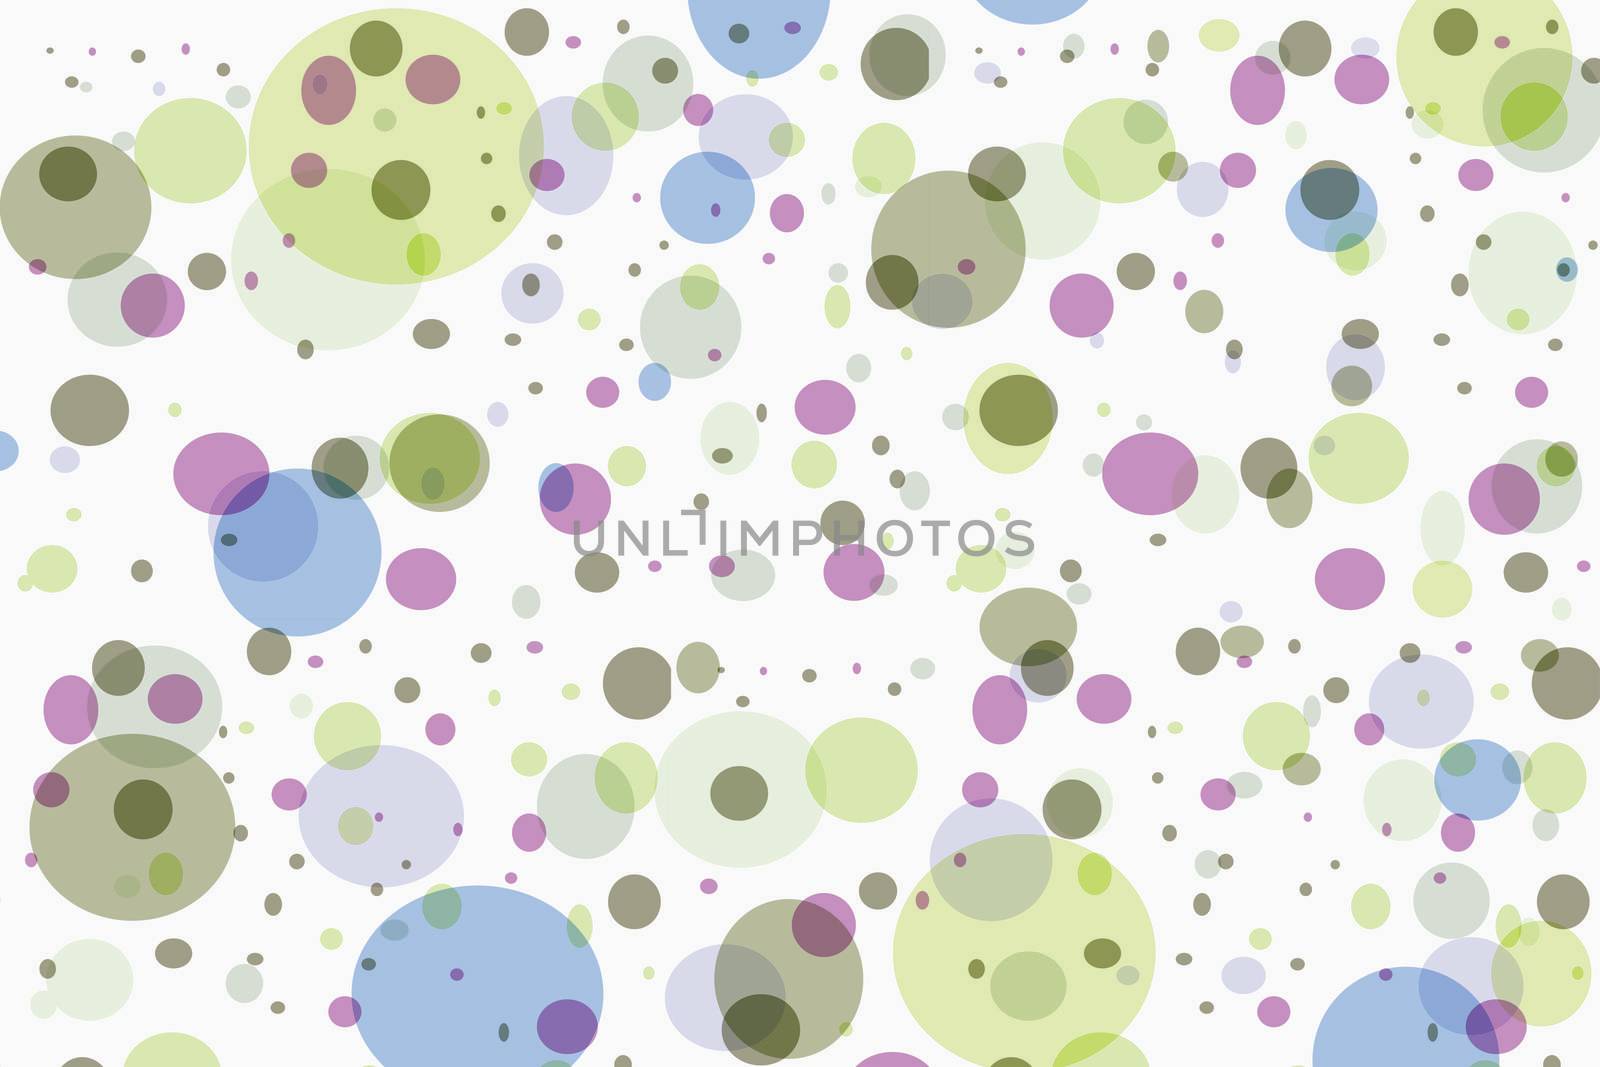 Background or abstract texture of dots and circles of different colors, looking like a sample under a microscope